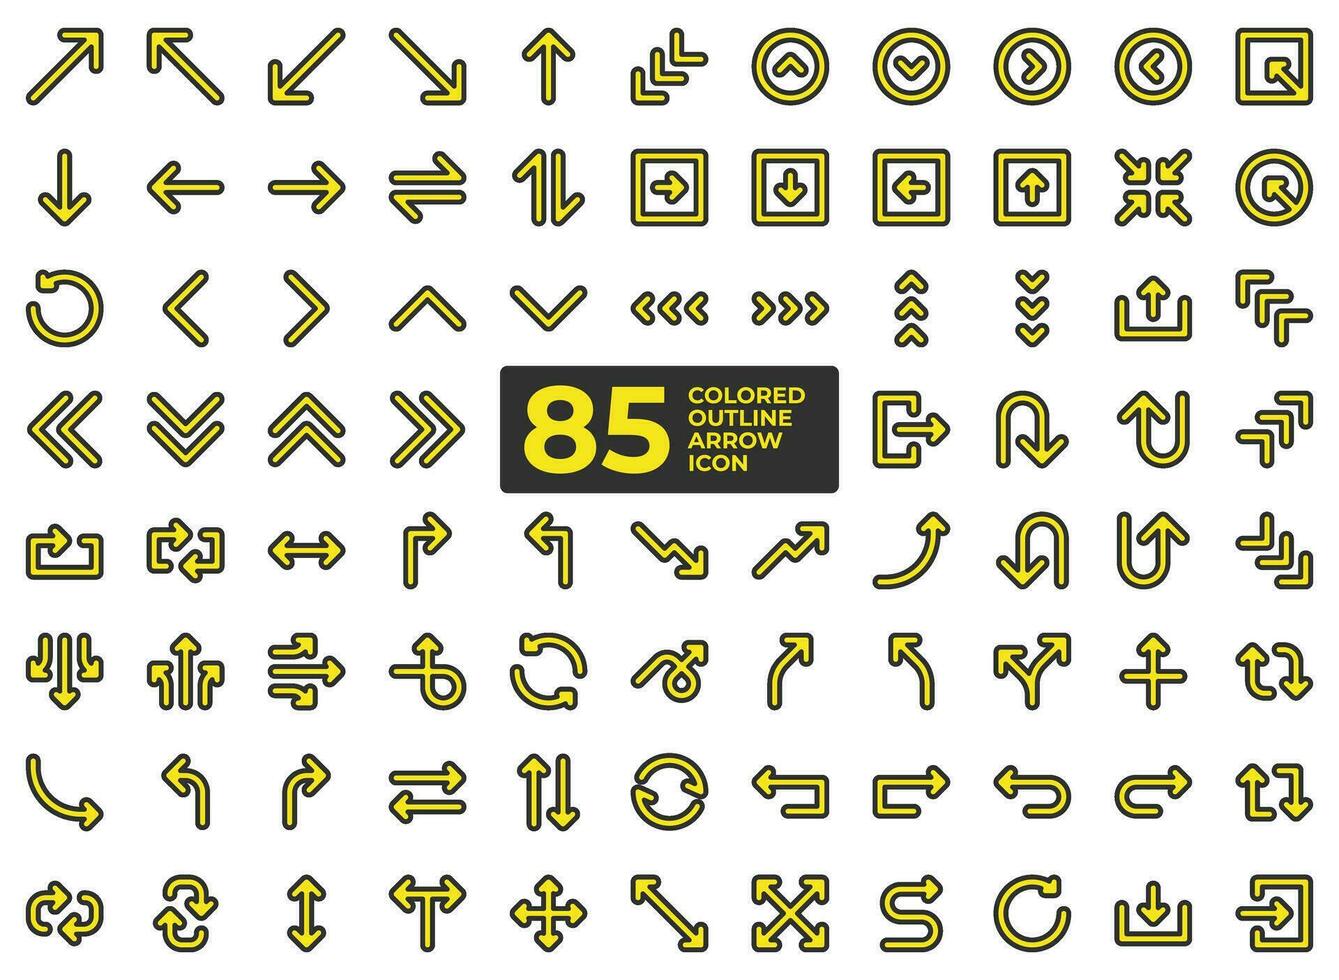 icon set of two-line arrow symbol, yellow and black in pixel perfect for directions and user interface as well as for traffic signs. This includes forward, back, turn, reverse, rewind, up and down. vector